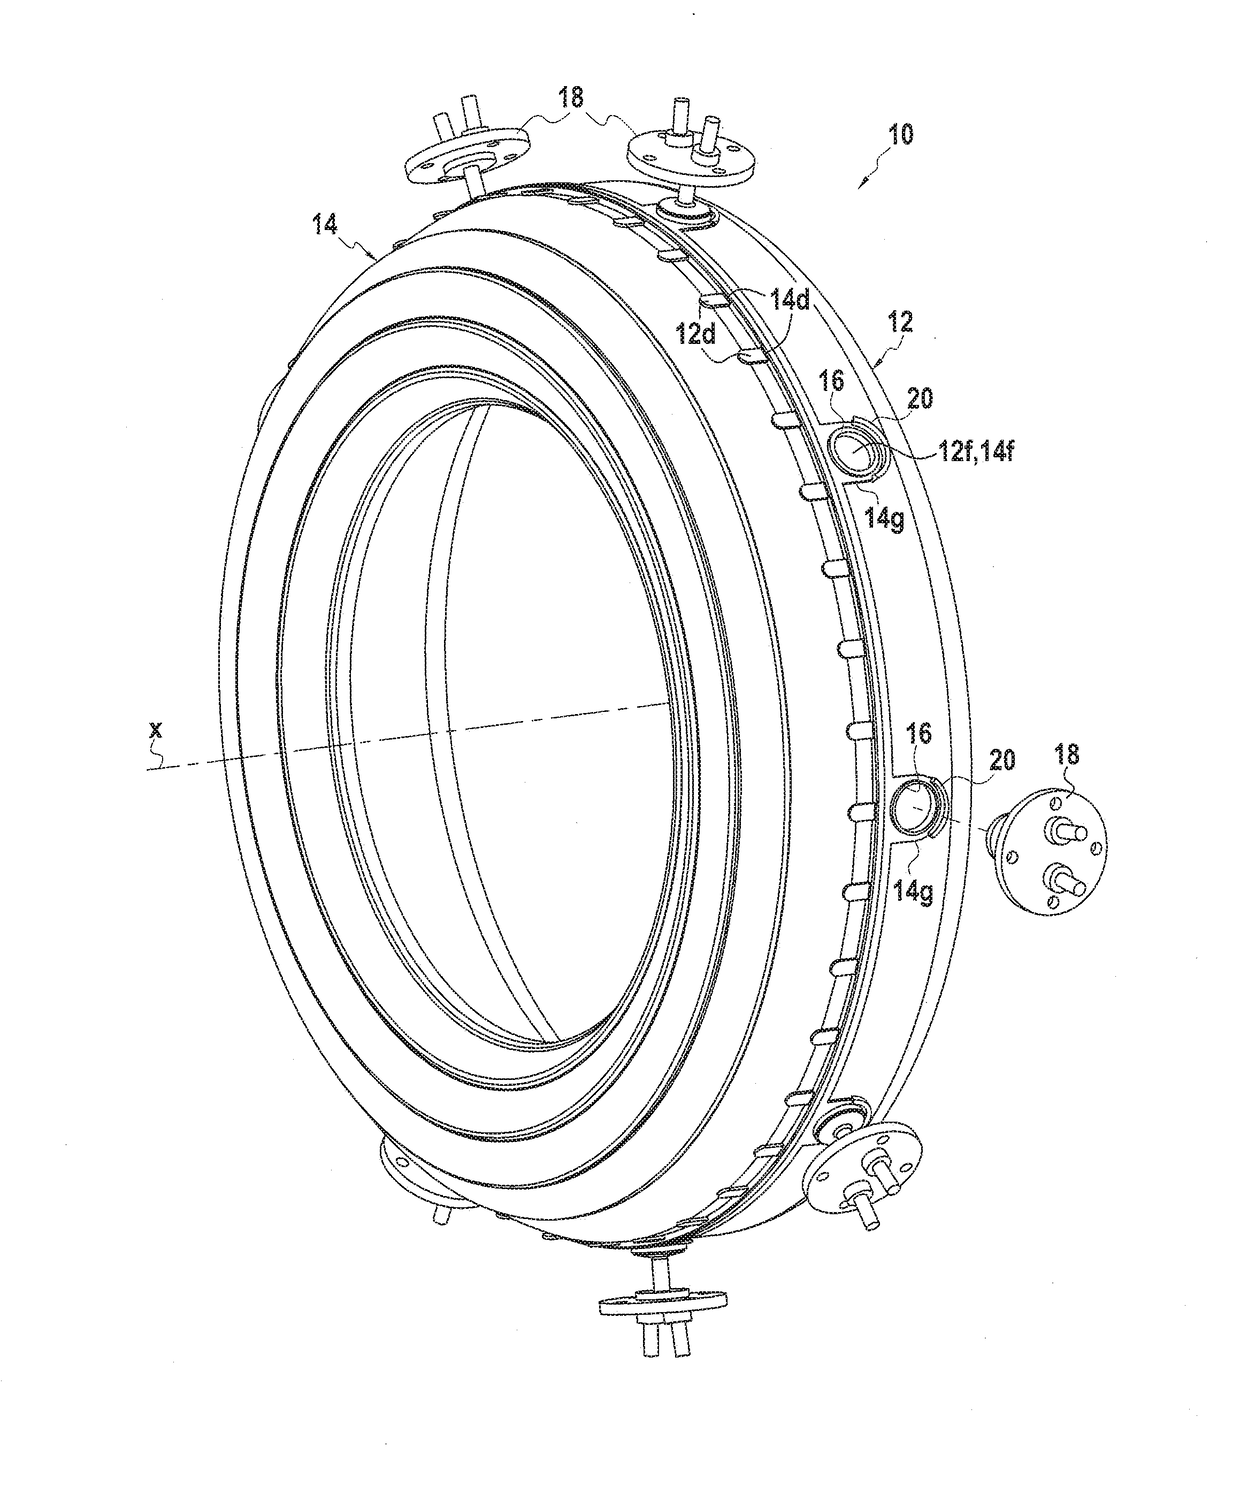 Annular turbomachine combustion chamber